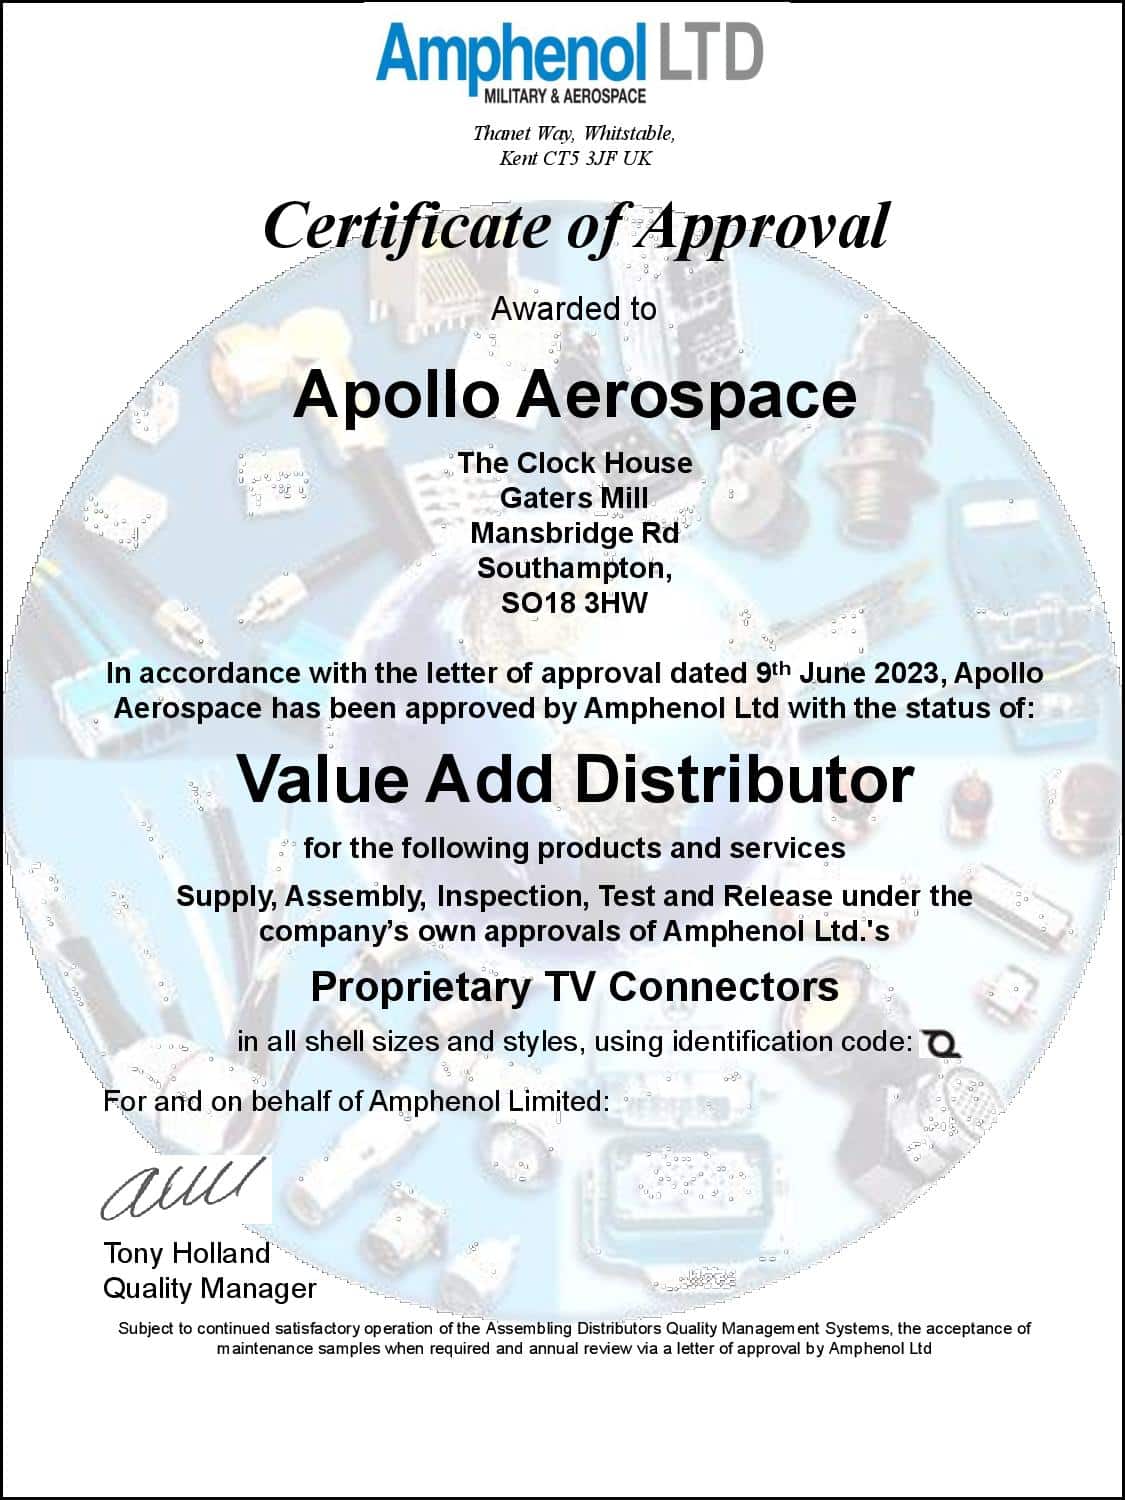 Amphenol VAD Approval Certificate